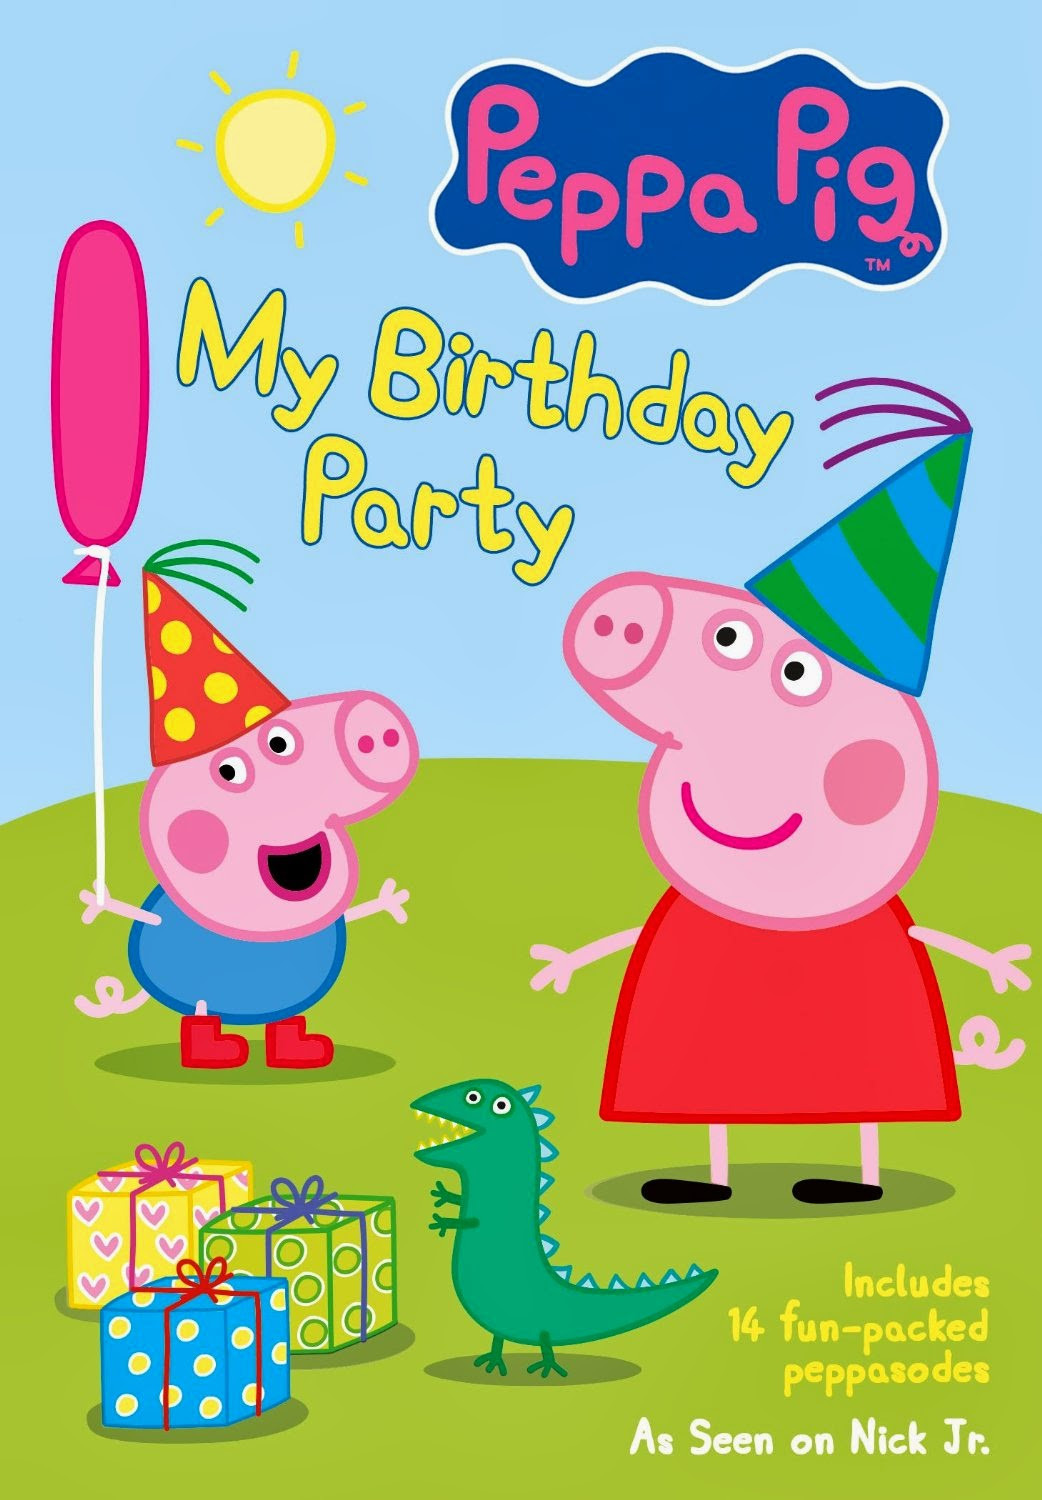 Peppa Pig Birthday Decorations
 Thanks Mail Carrier